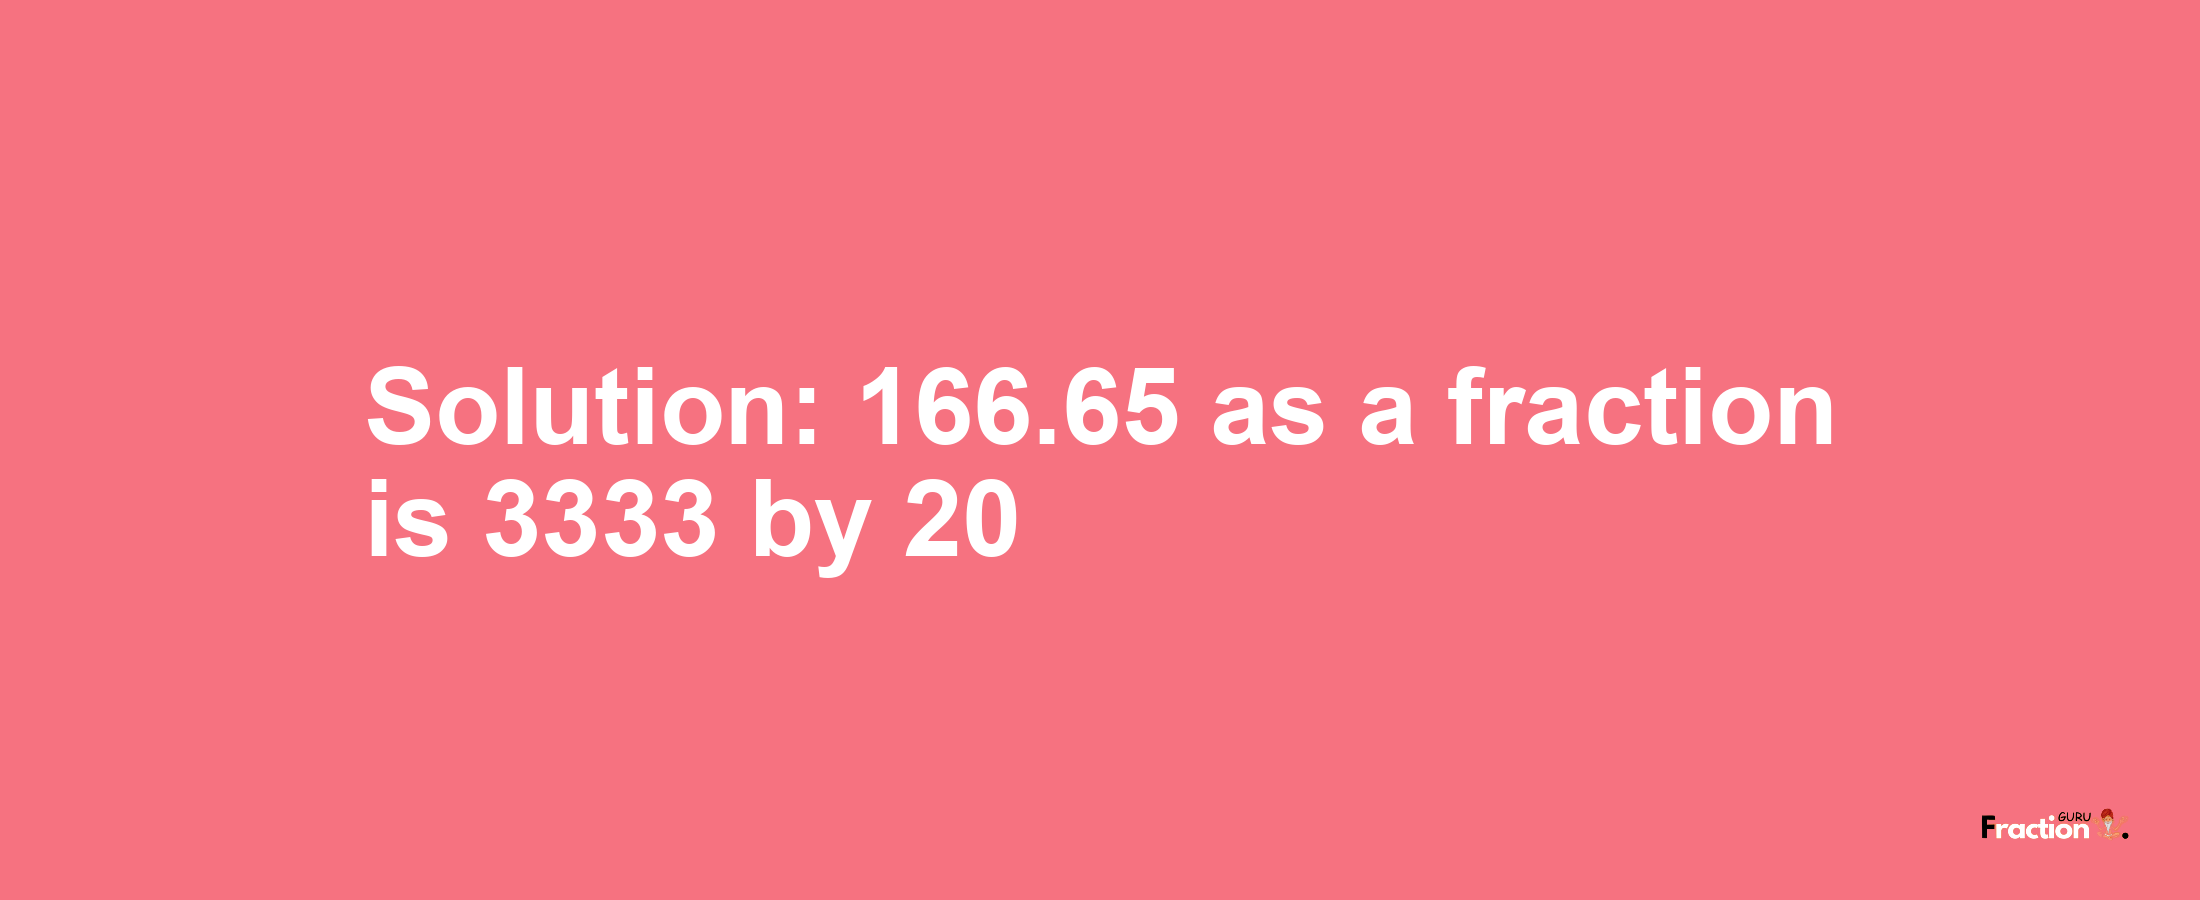 Solution:166.65 as a fraction is 3333/20